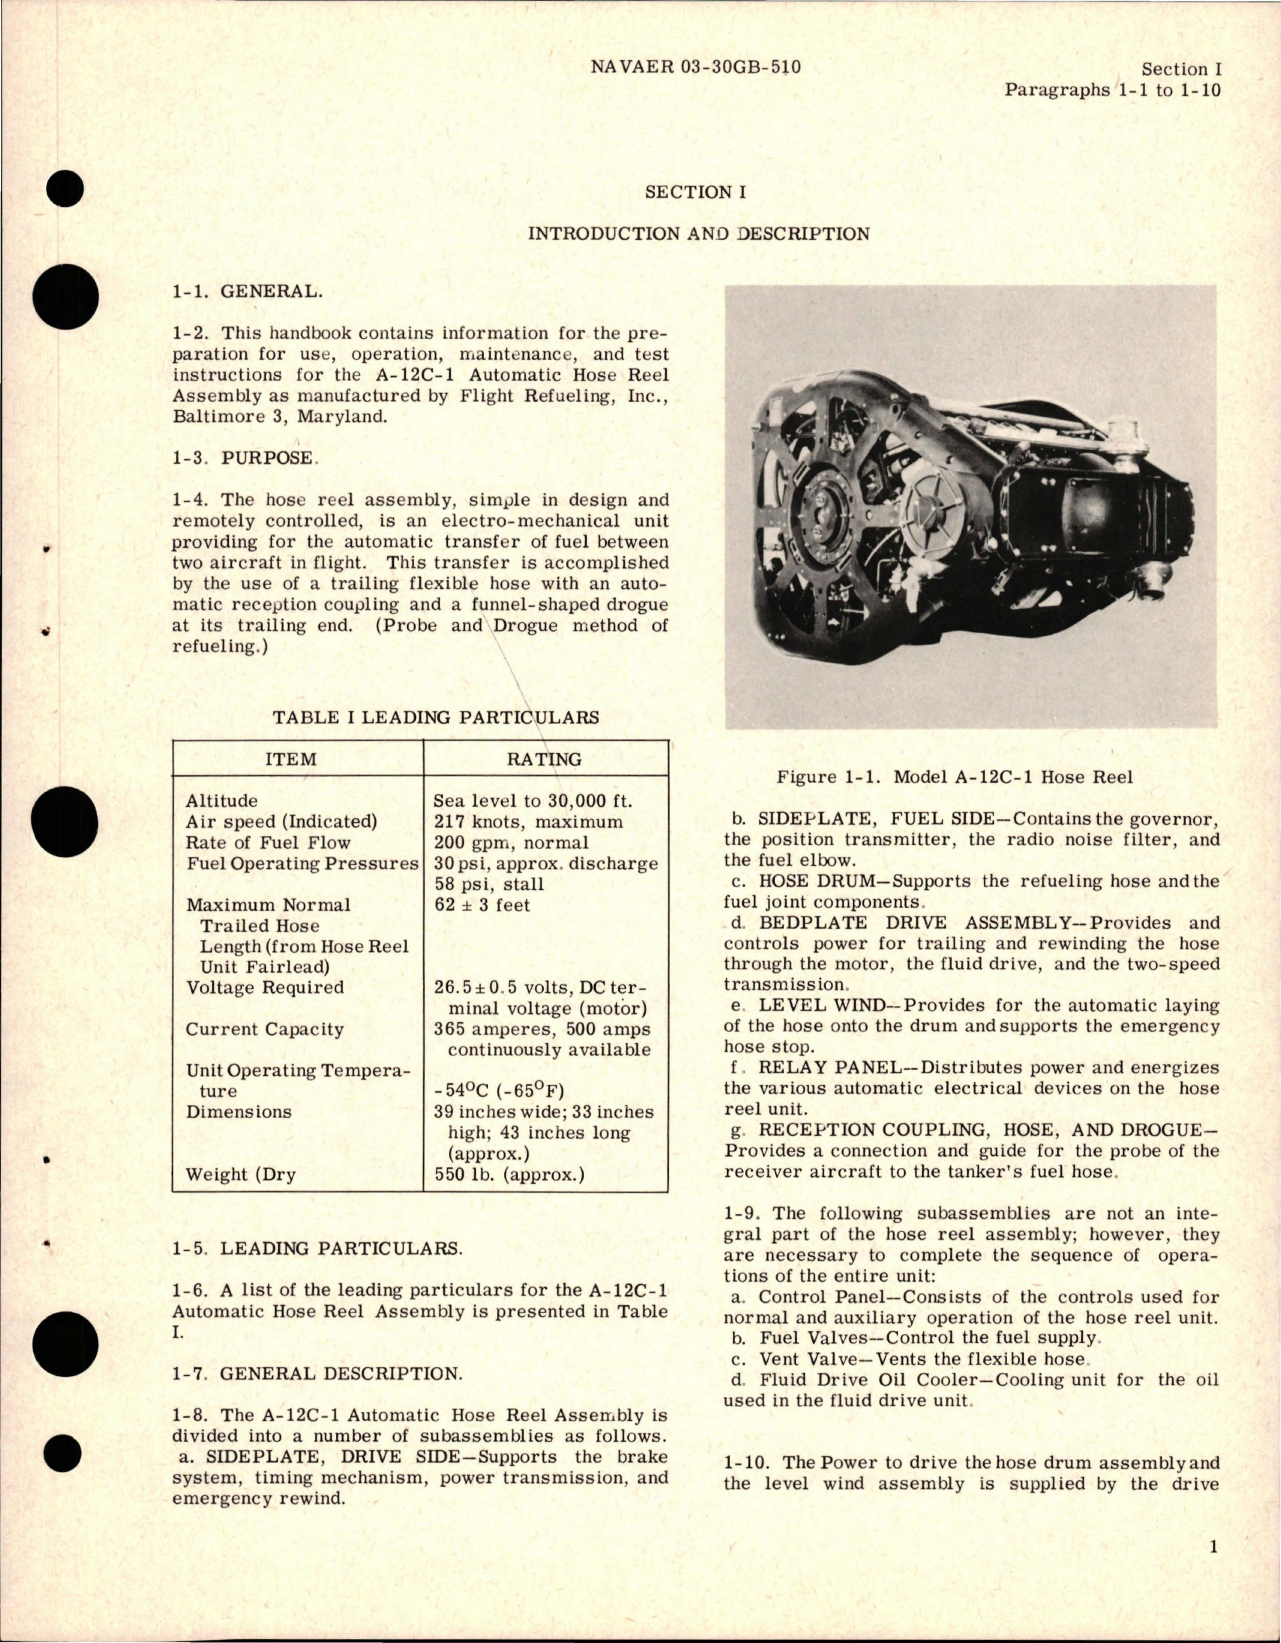 Sample page 7 from AirCorps Library document: Operation and Maintenance Instructions for Automatic Hose Reel Assemblies - Models A-12C, A-12A-2, and A-12C-1